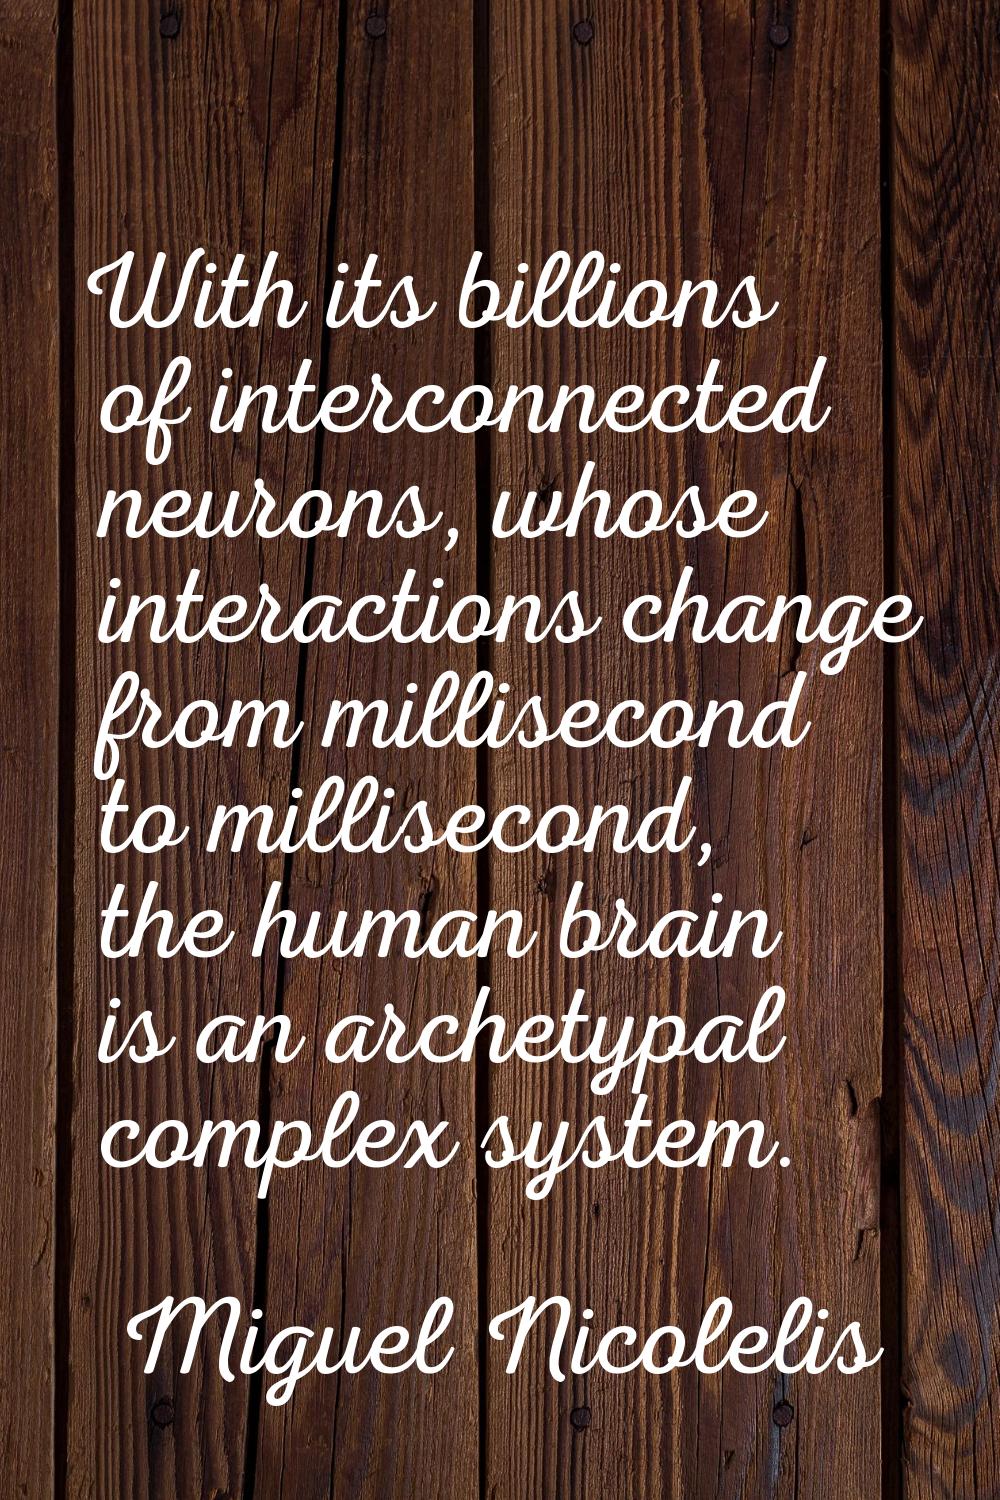 With its billions of interconnected neurons, whose interactions change from millisecond to millisec